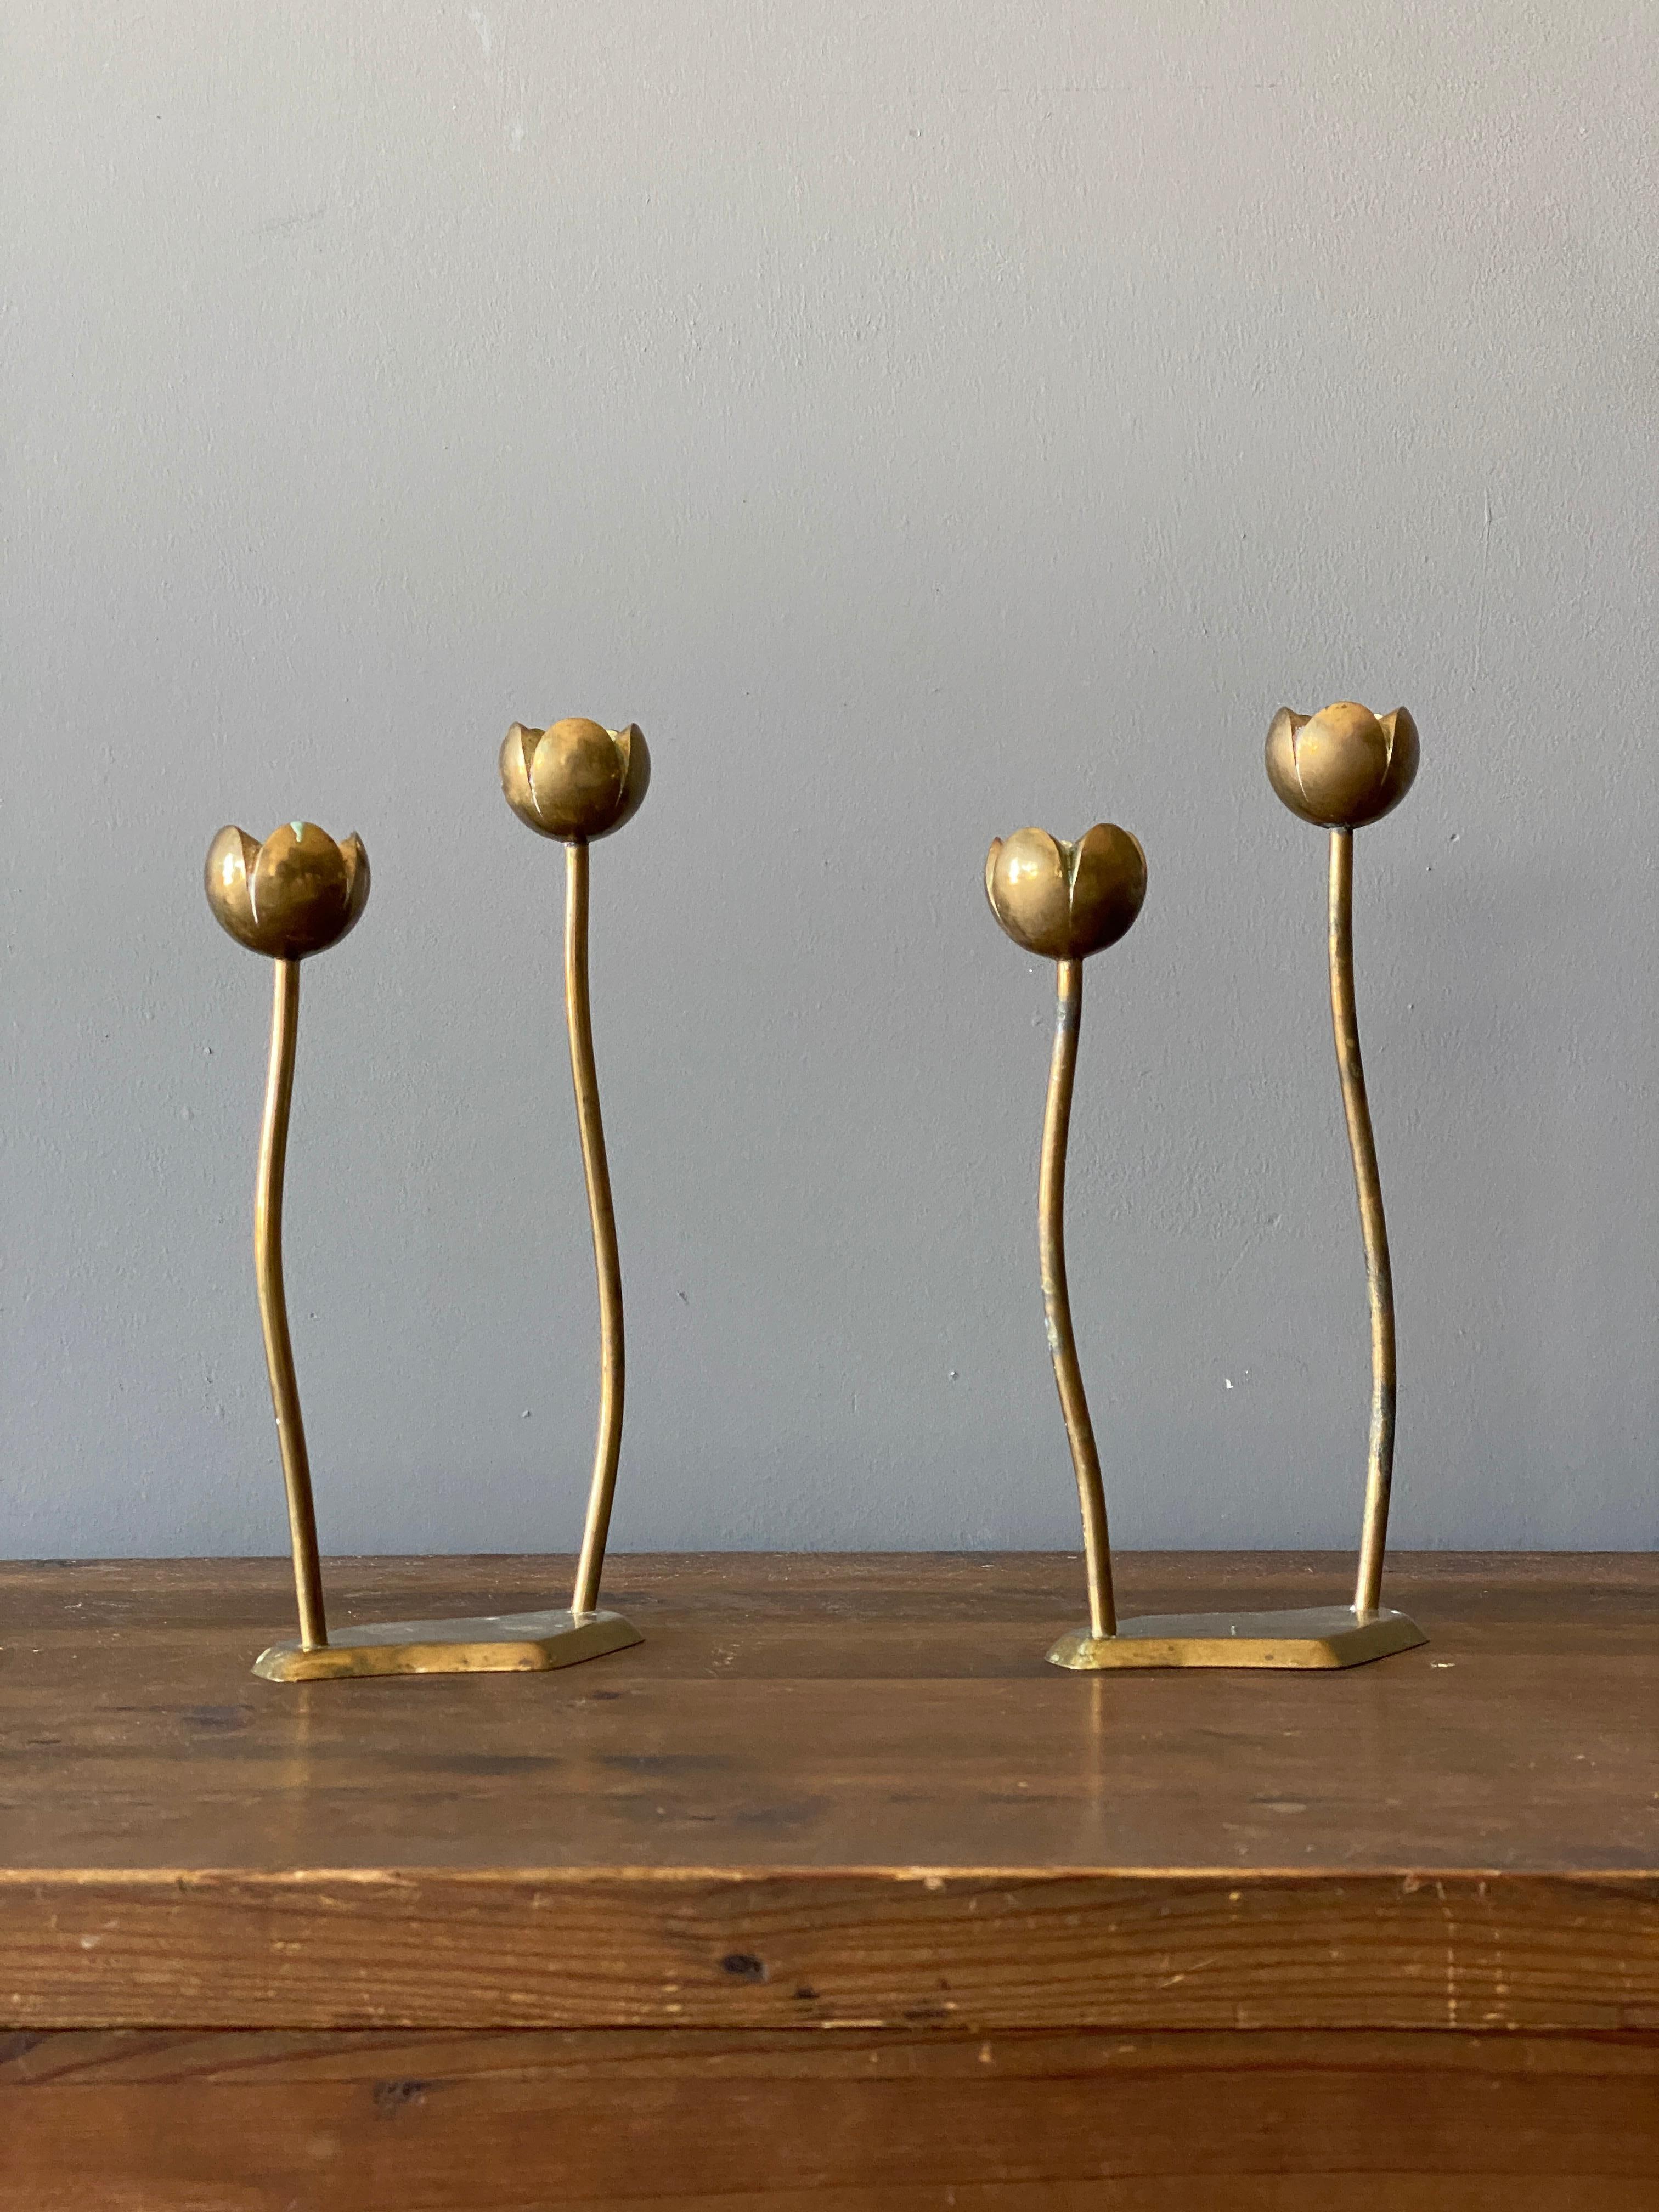 A pair of organic modernist candlesticks / candleholders. Produced by Sib Staken Berggren, Kalmar, Sweden, circa 1970s.

Other designers of the period include Josef Frank, Paavo Tynell, Hans-Agne Jacobsen, Hans Bergström, and Gio Ponti.